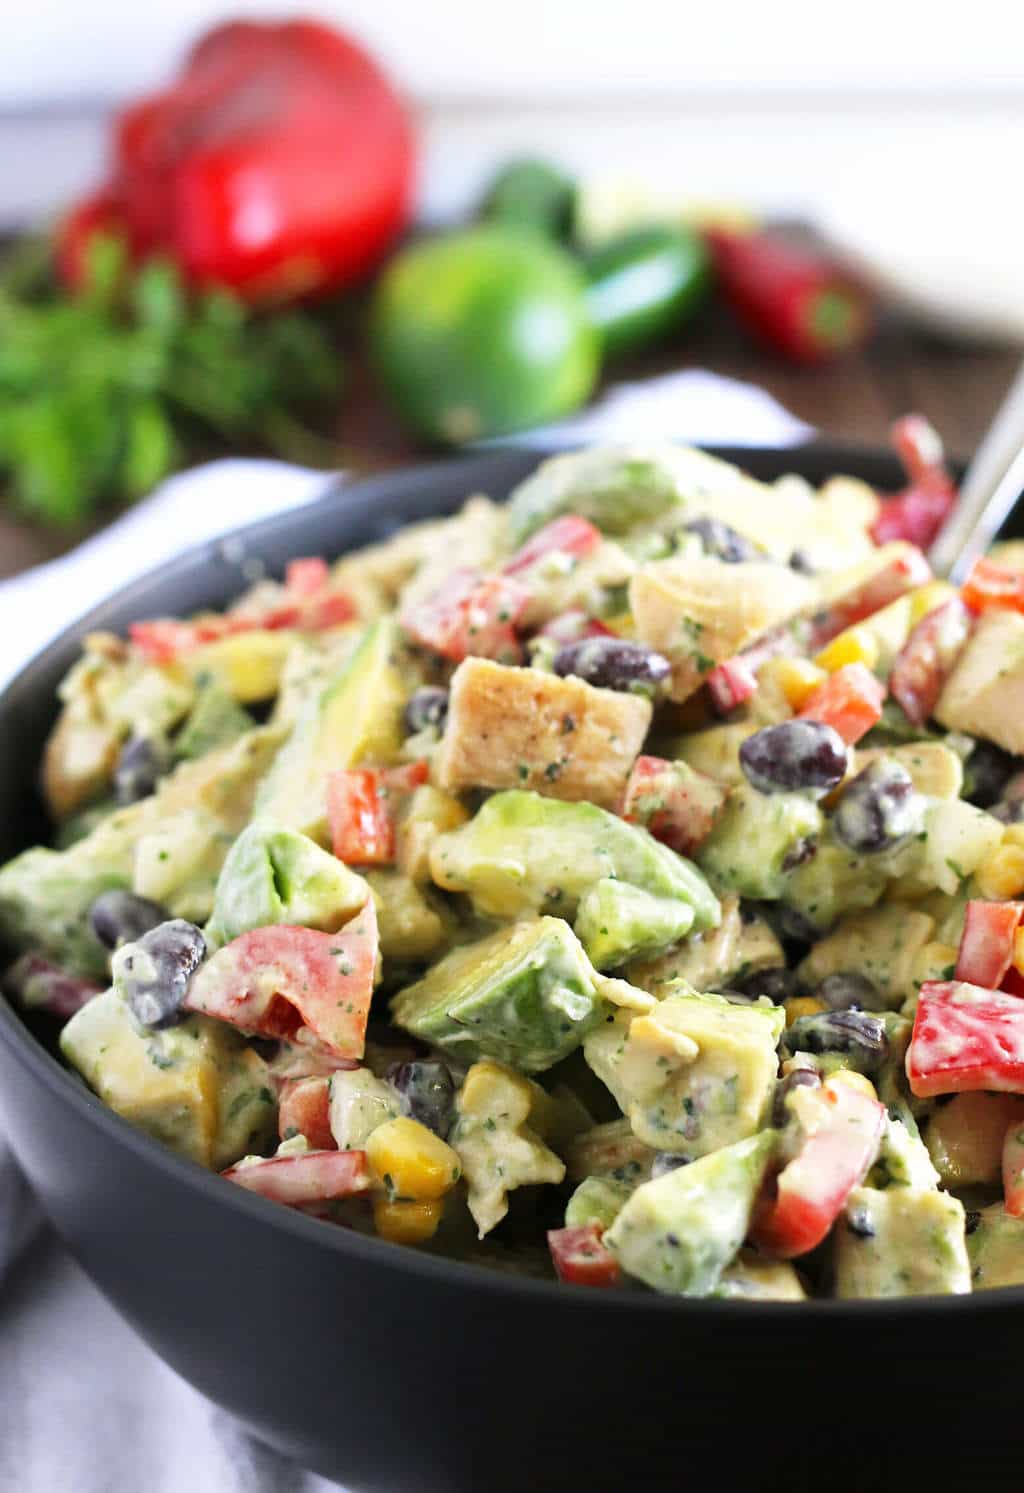 This grilled chicken avocado salad is topped with homemade jalapeno cilantro dressing. It is the perfect easy